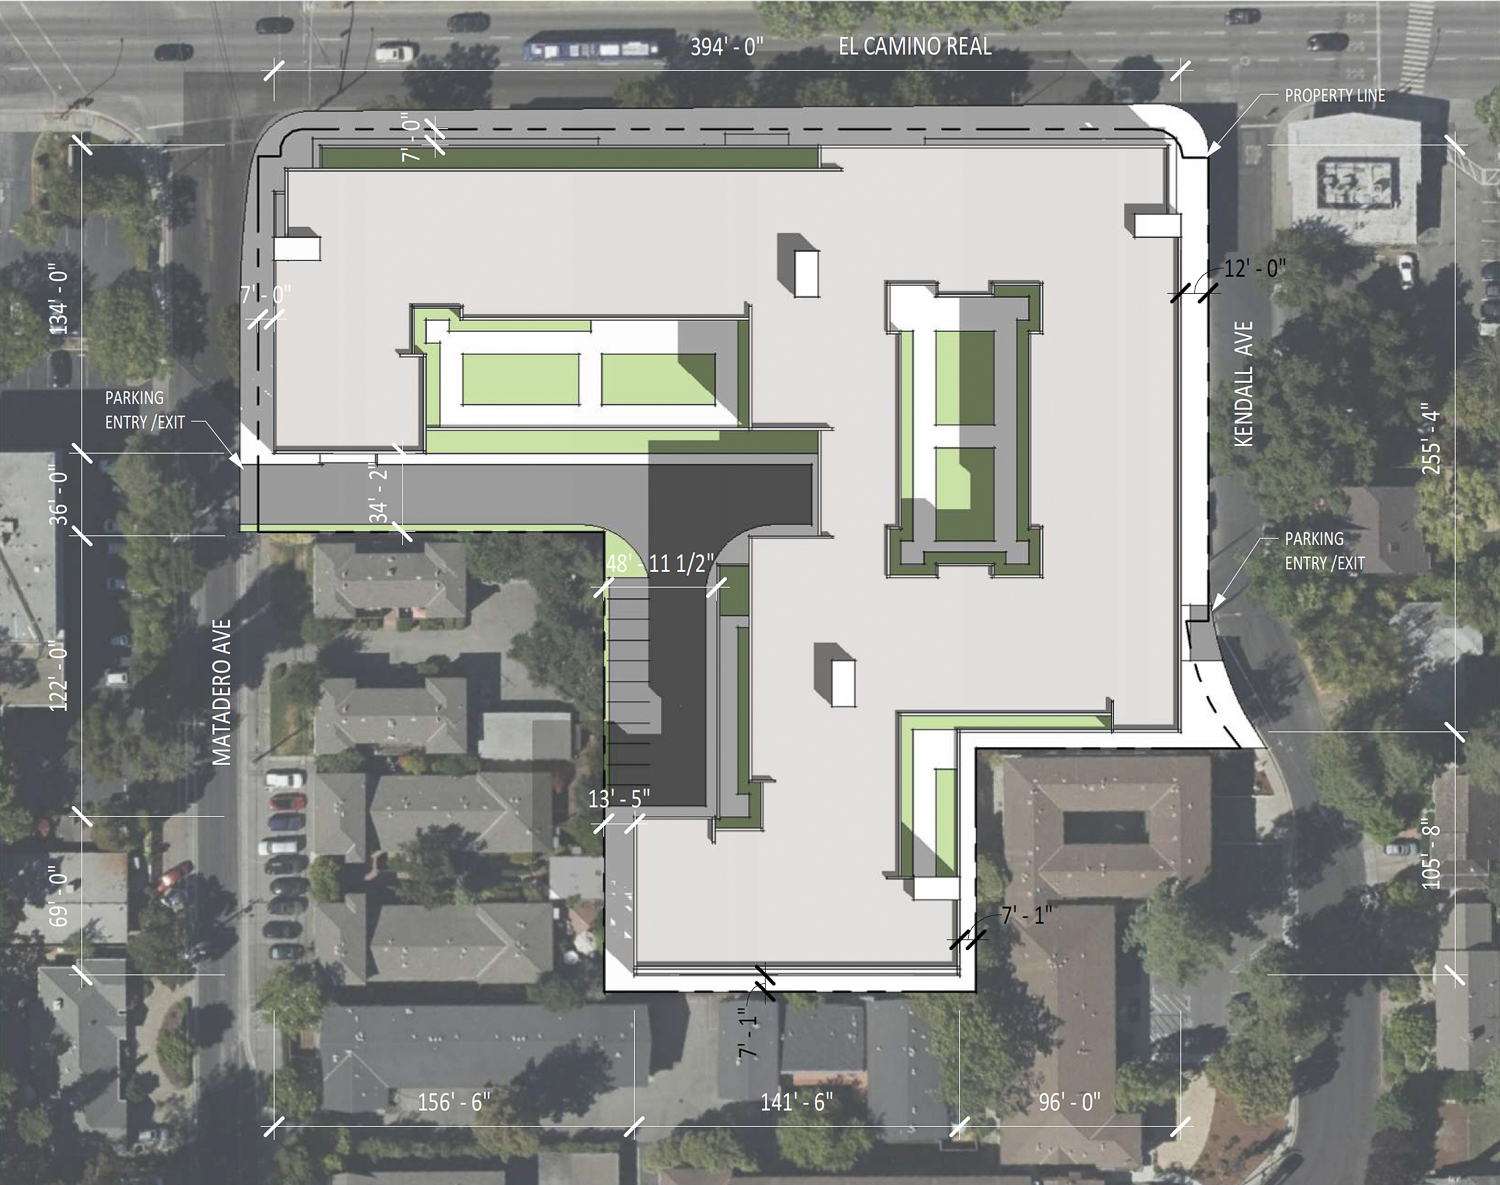 3606 El Camino Real site map, illustration by Lowney Architecture